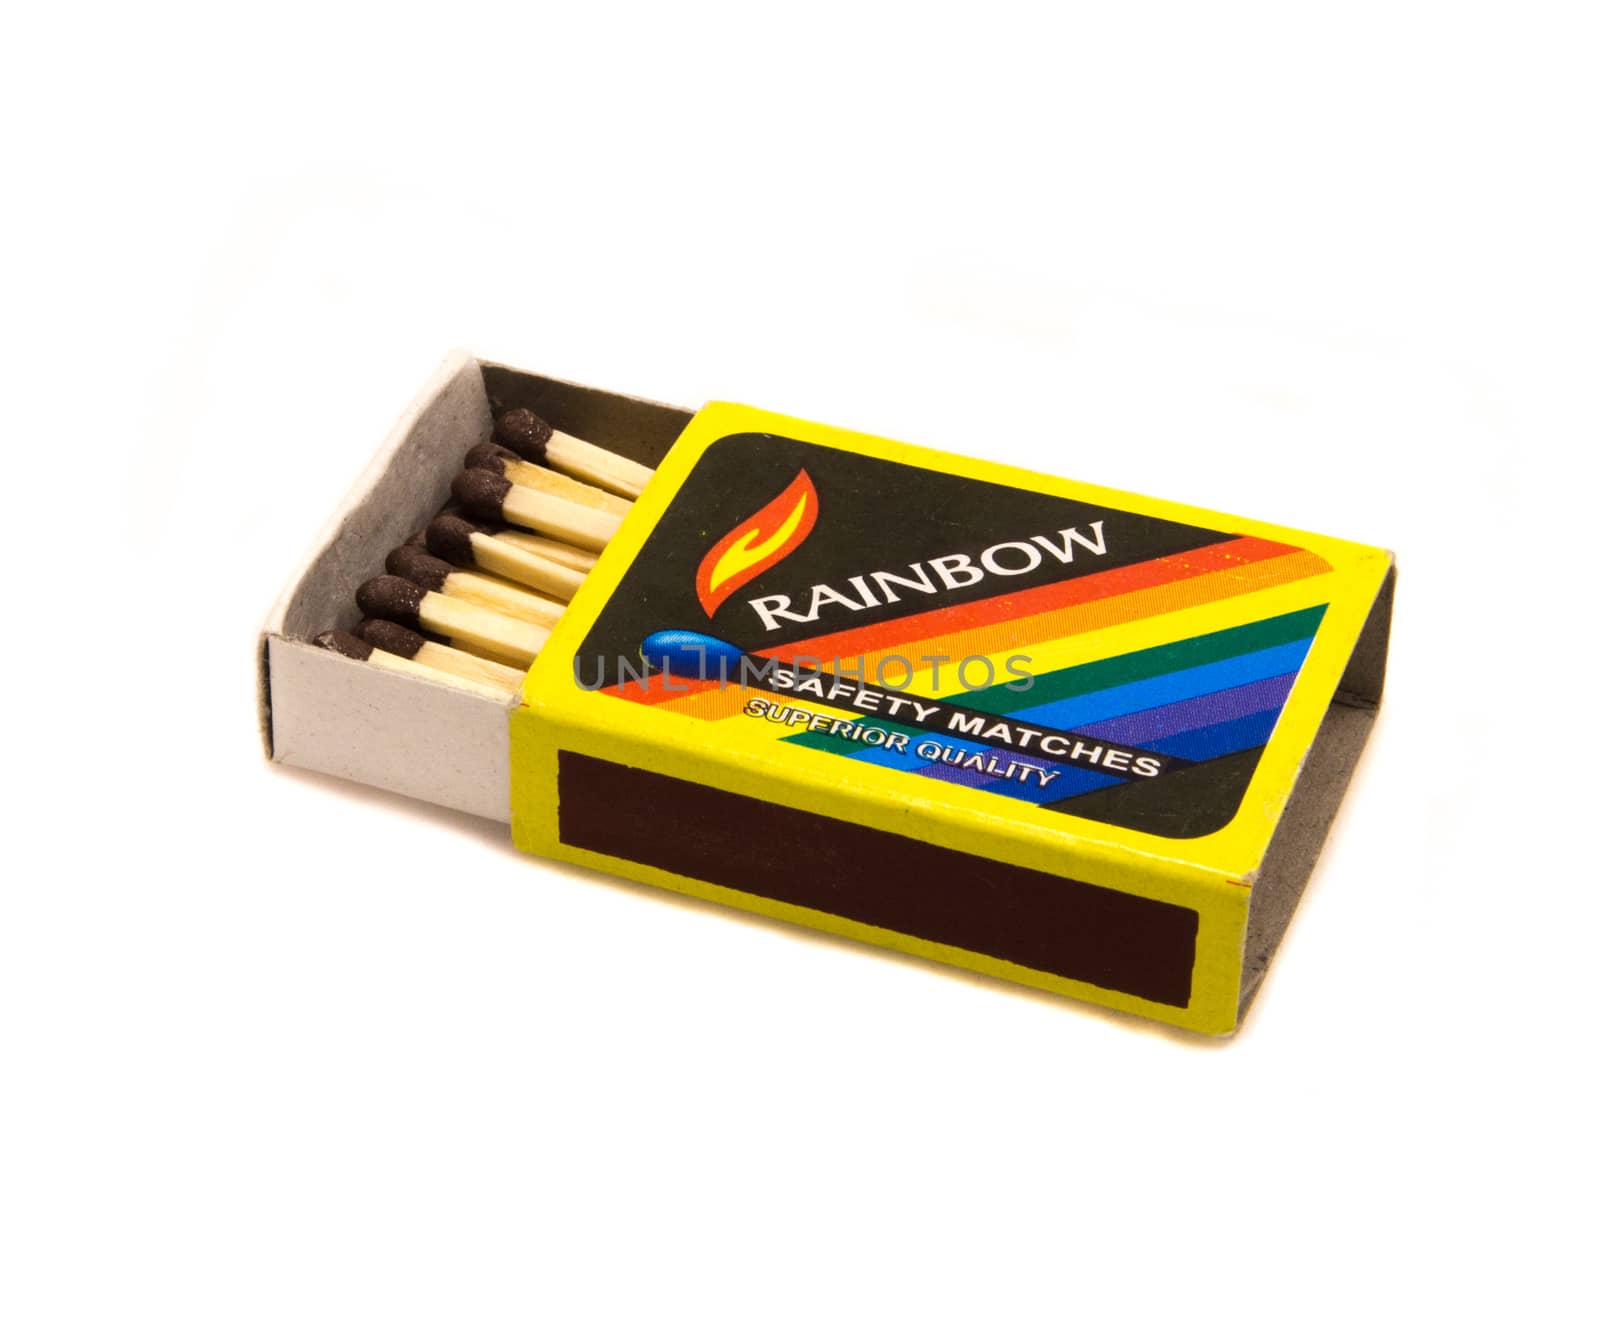 a box of matches on a white background